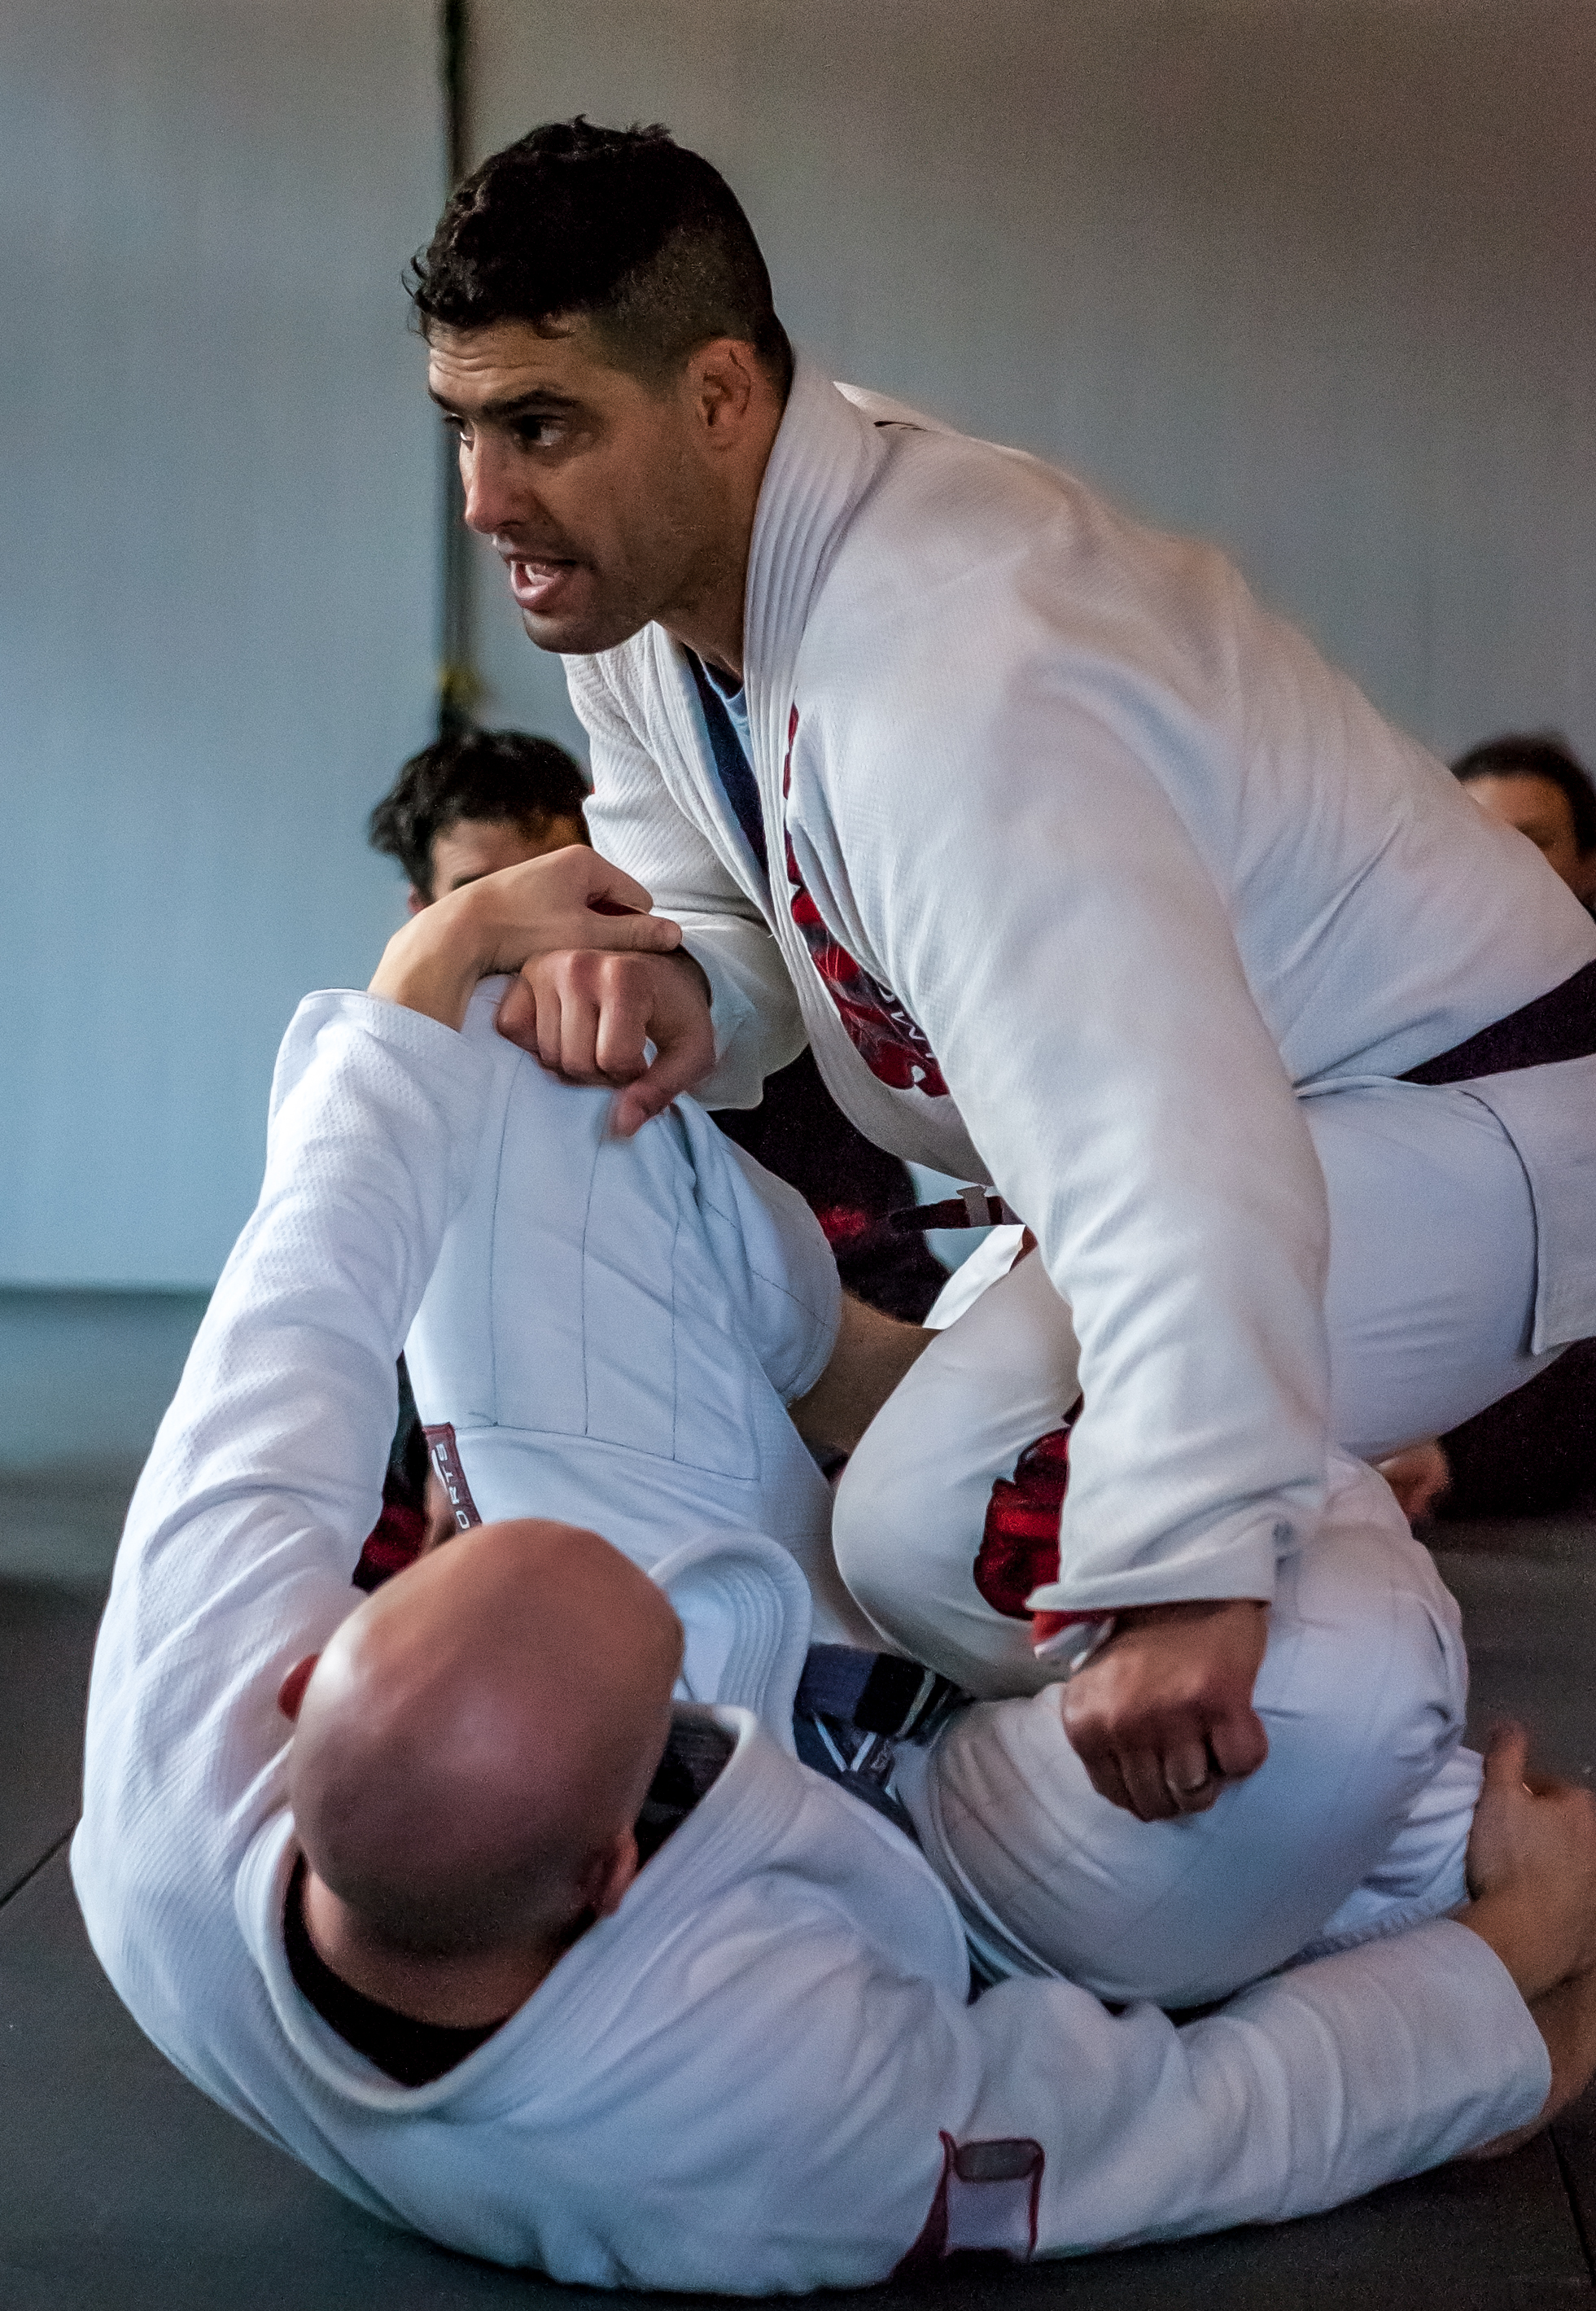 Half-Guard & Bullfighter Style Guard Passing with Daniel Gracie and Marcelo Cruz